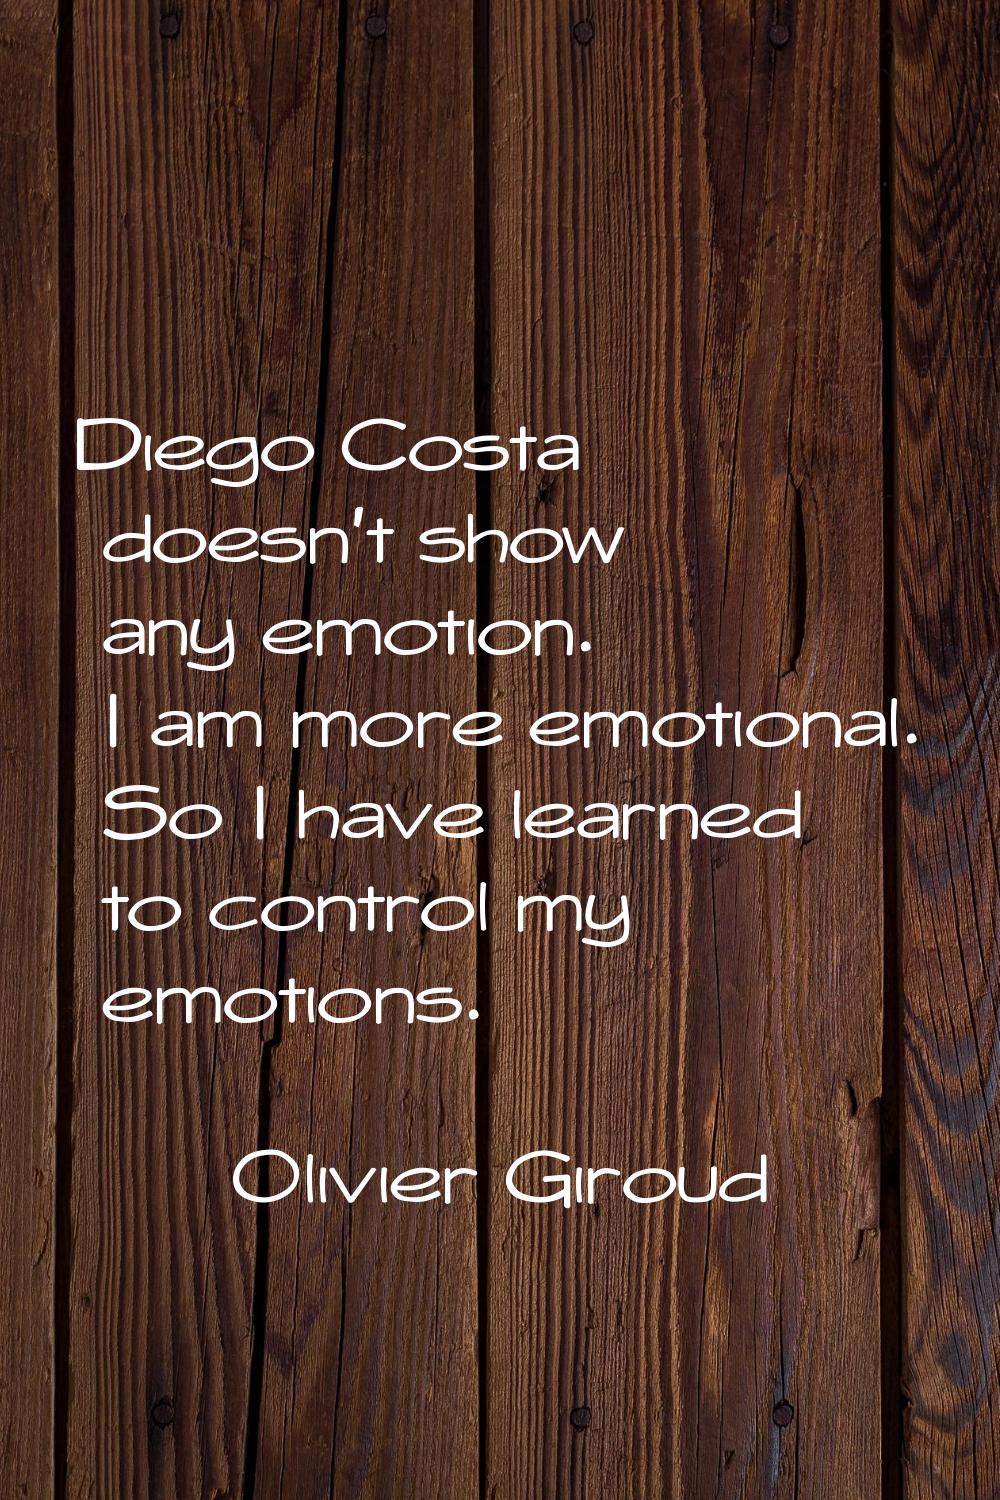 Diego Costa doesn't show any emotion. I am more emotional. So I have learned to control my emotions